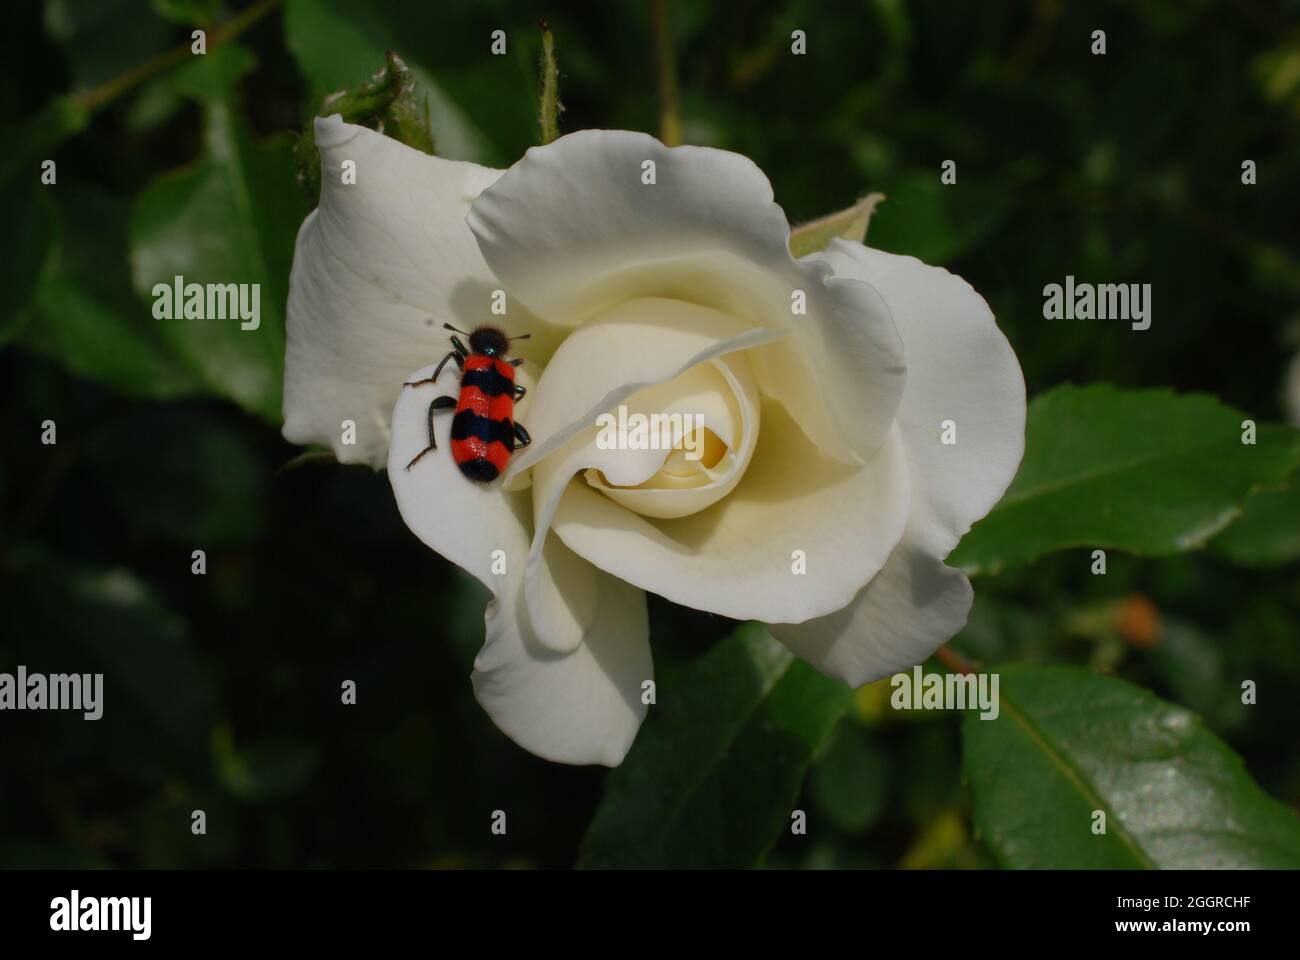 Closeup shot of a beetle on a white rose Stock Photo